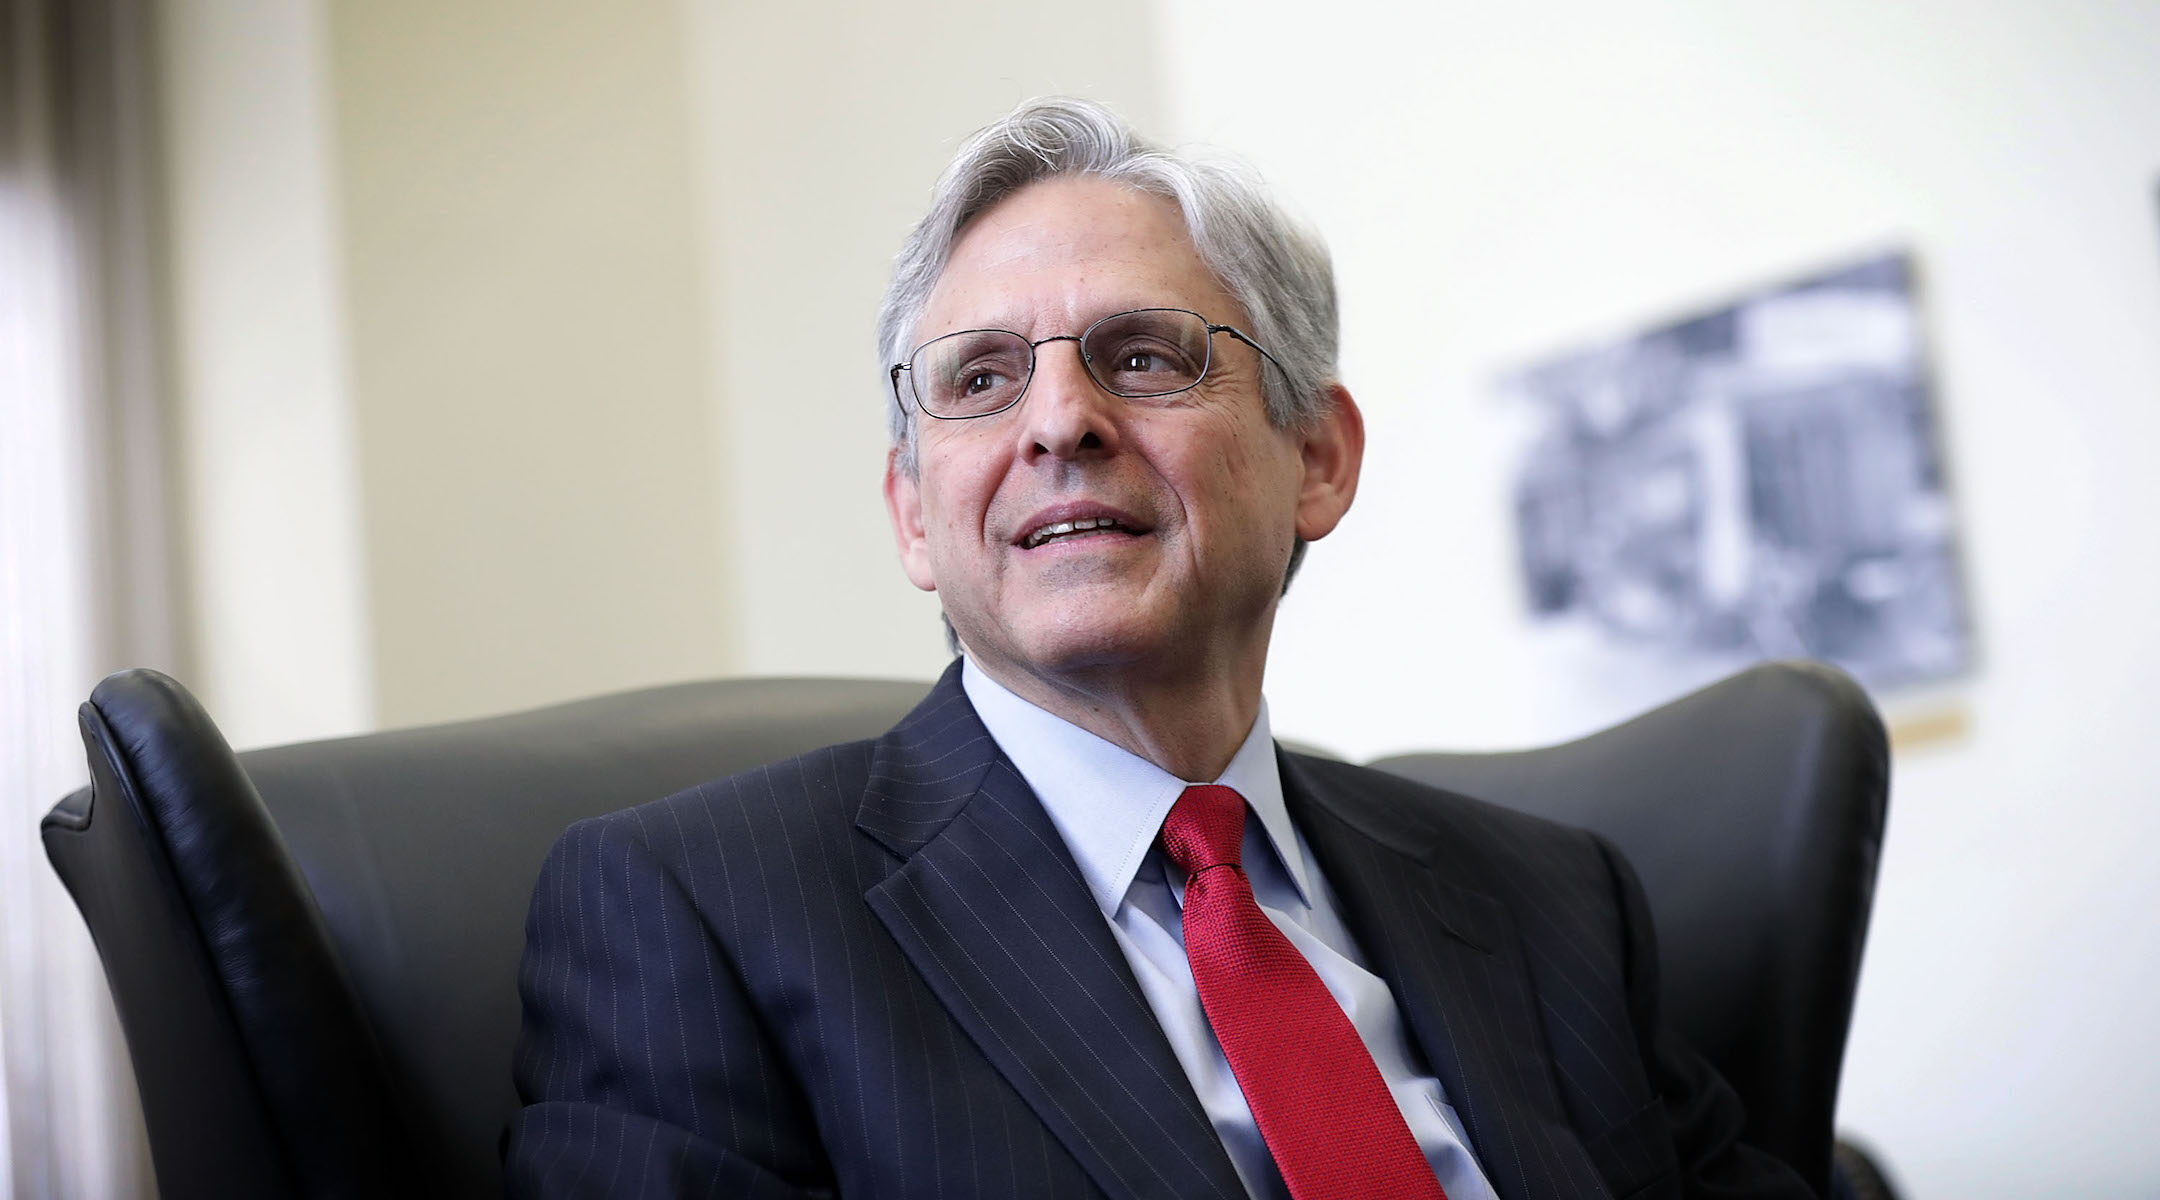 Merrick Garland, shown here in 2016, has been nominated to be the next attorney general. (Alex Wong/Getty Images)